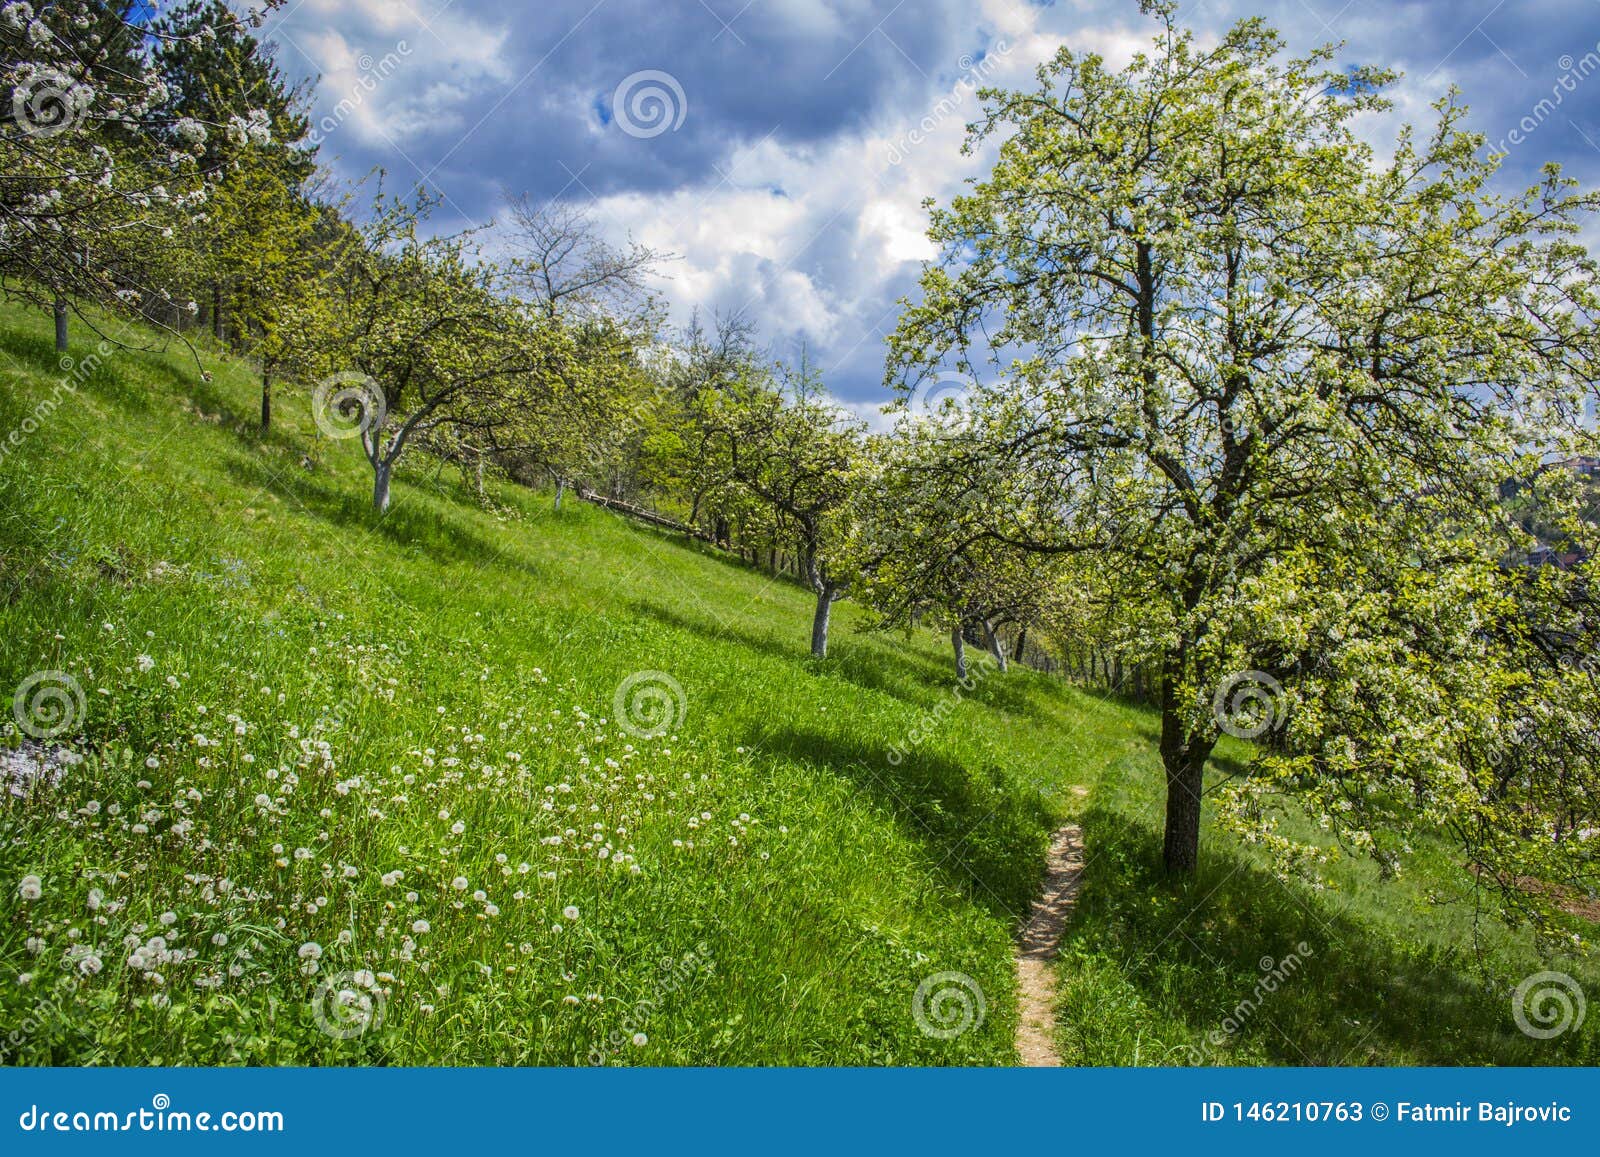 A Beautiful View of Natural Beauty. a View of the Spring Landscapes